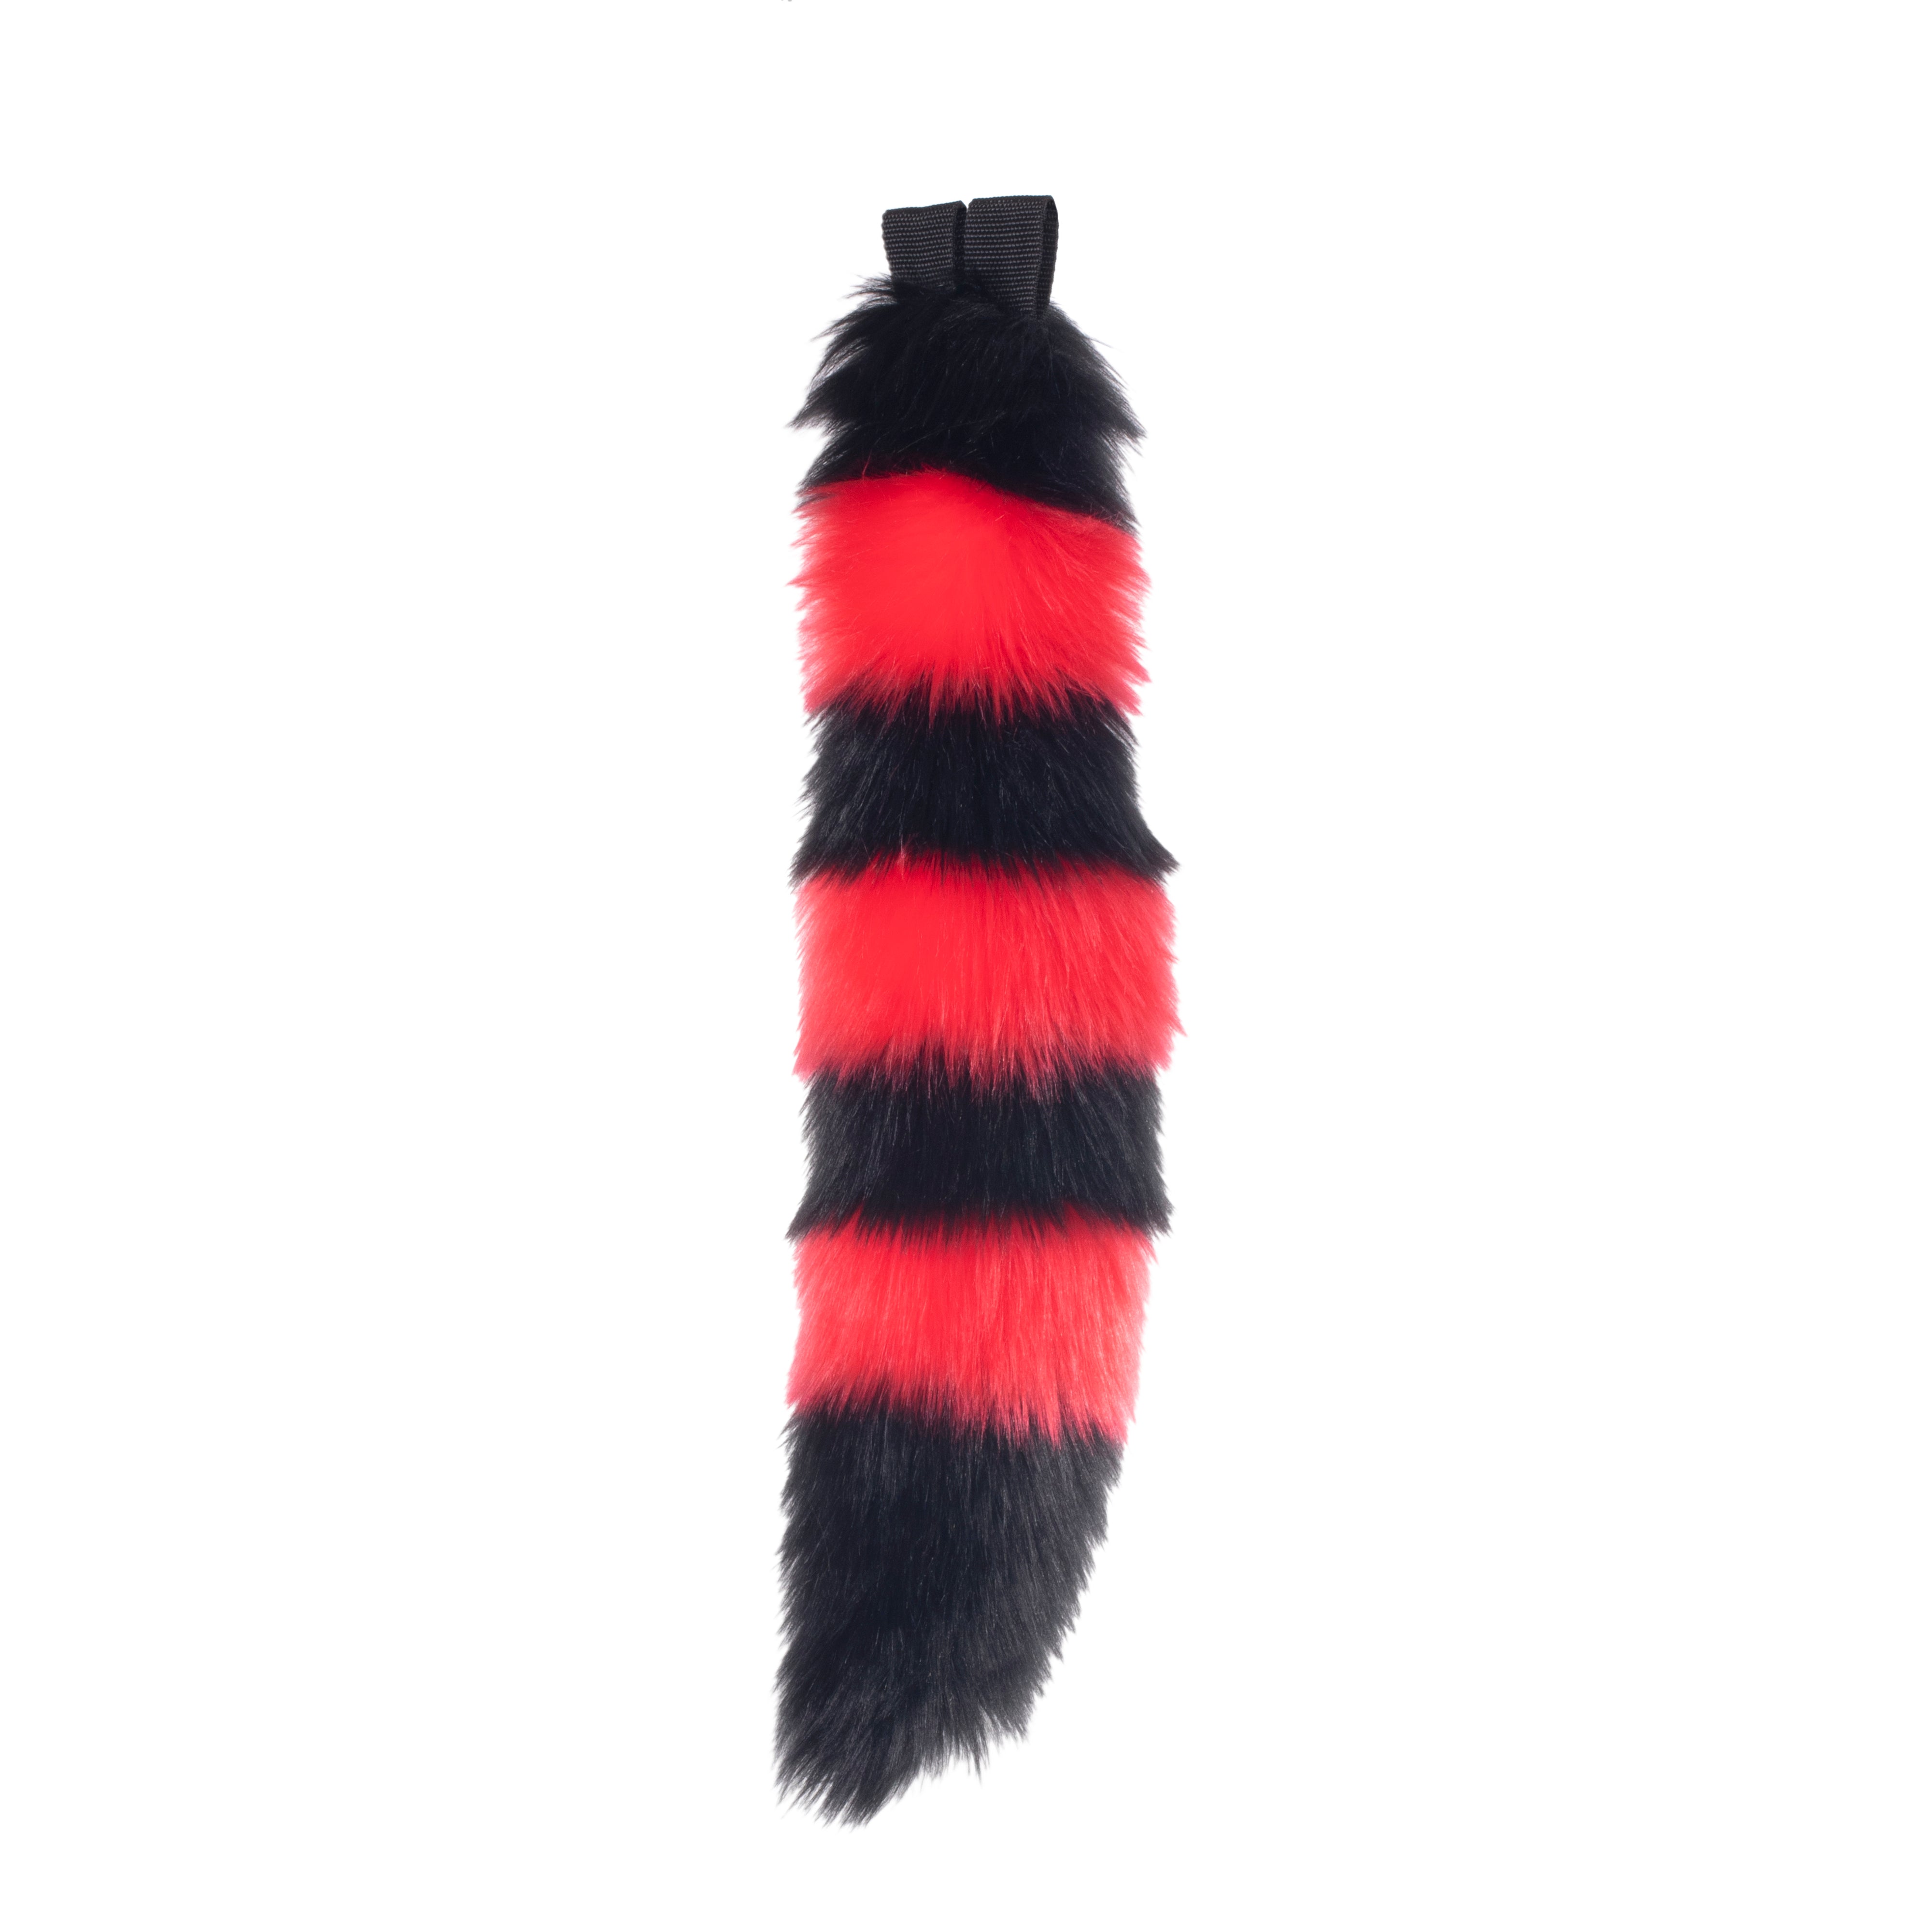 red Pawstar fluffy stripey mini fox tail. Great for halloween costume and furry cosplay.